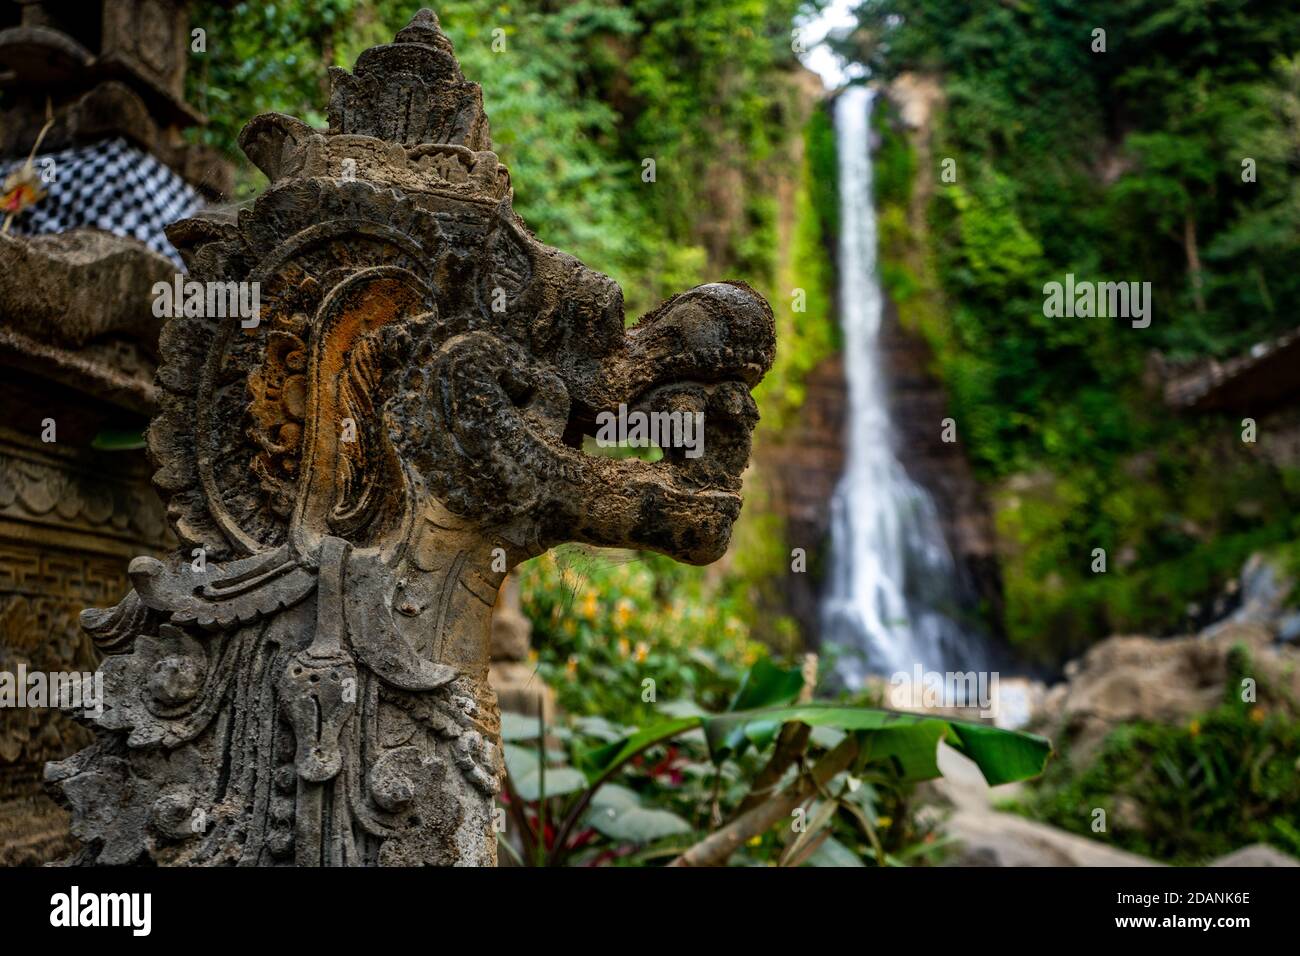 stone dragon sculpture and waterfall in background Stock Photo